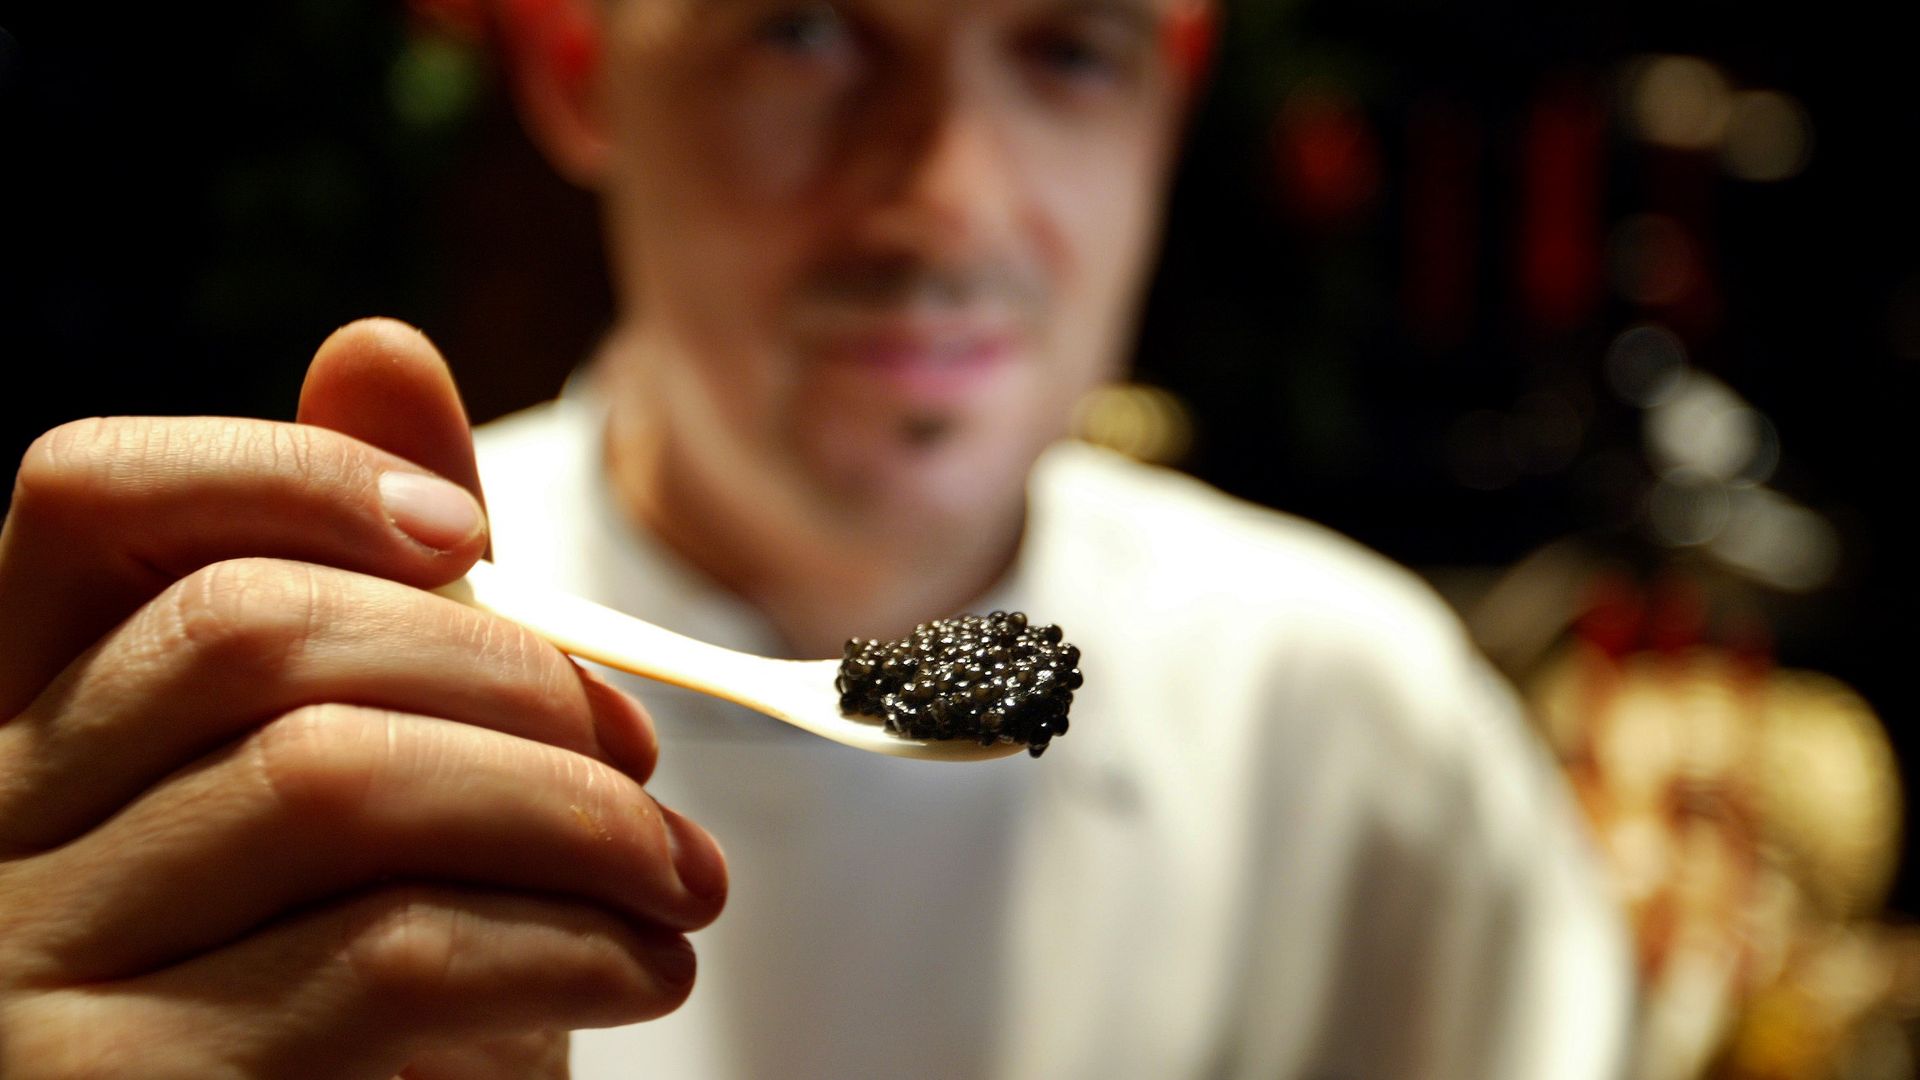 A man holds up caviar on a spoon.